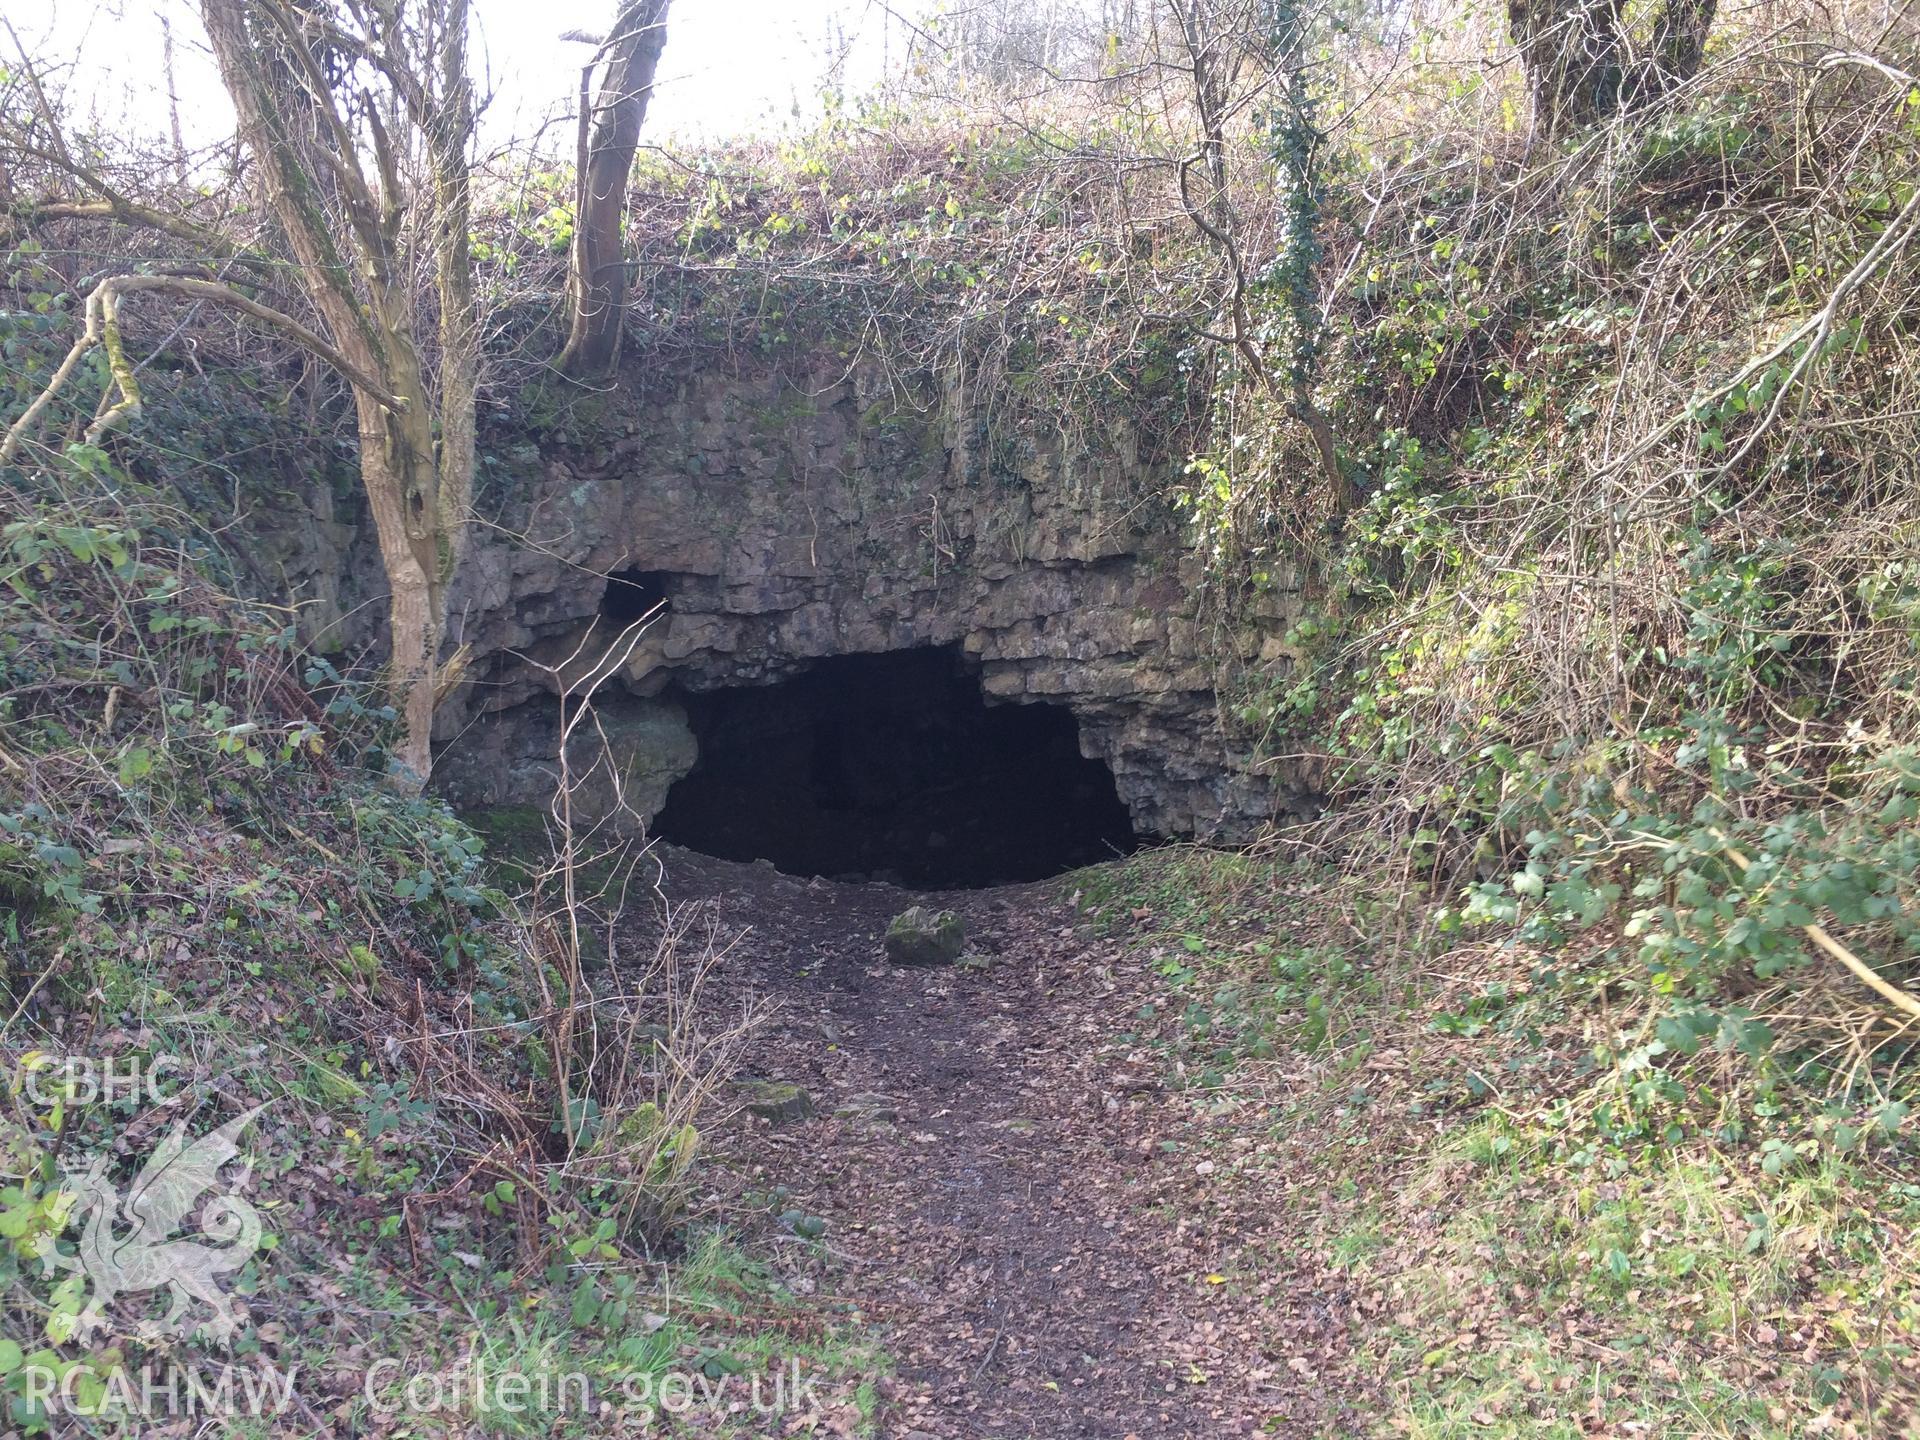 Colour photo showing view of Llanymynech cave taken by Paul R. Davis, 28th February 2018.